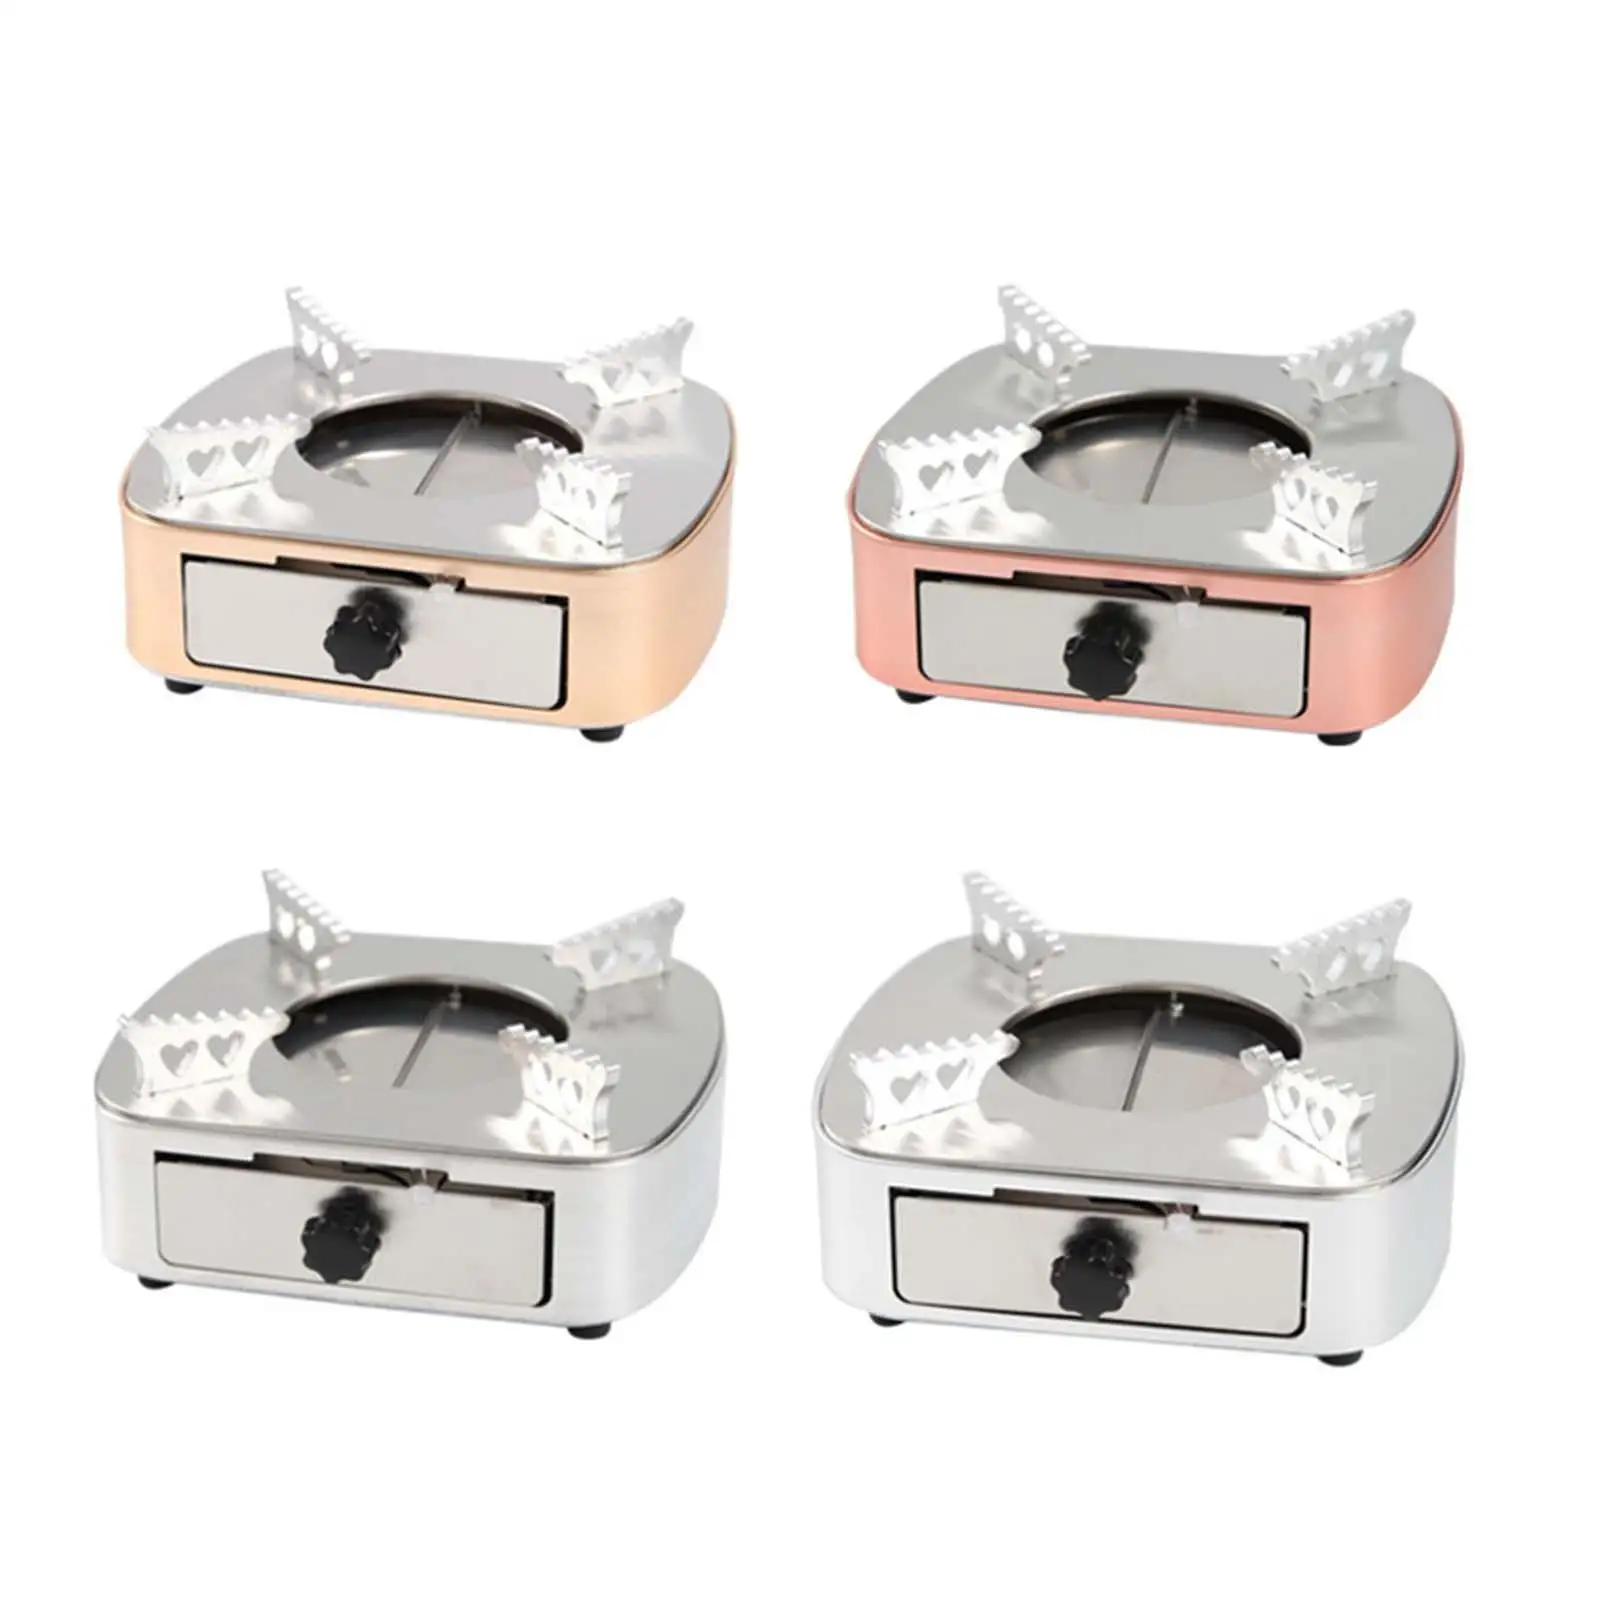 Portable Alcohol Stove Lightweight Furnace Windproof Burner Kitchen Equipment for Backpackers BBQ Picnic Hiking Cooking